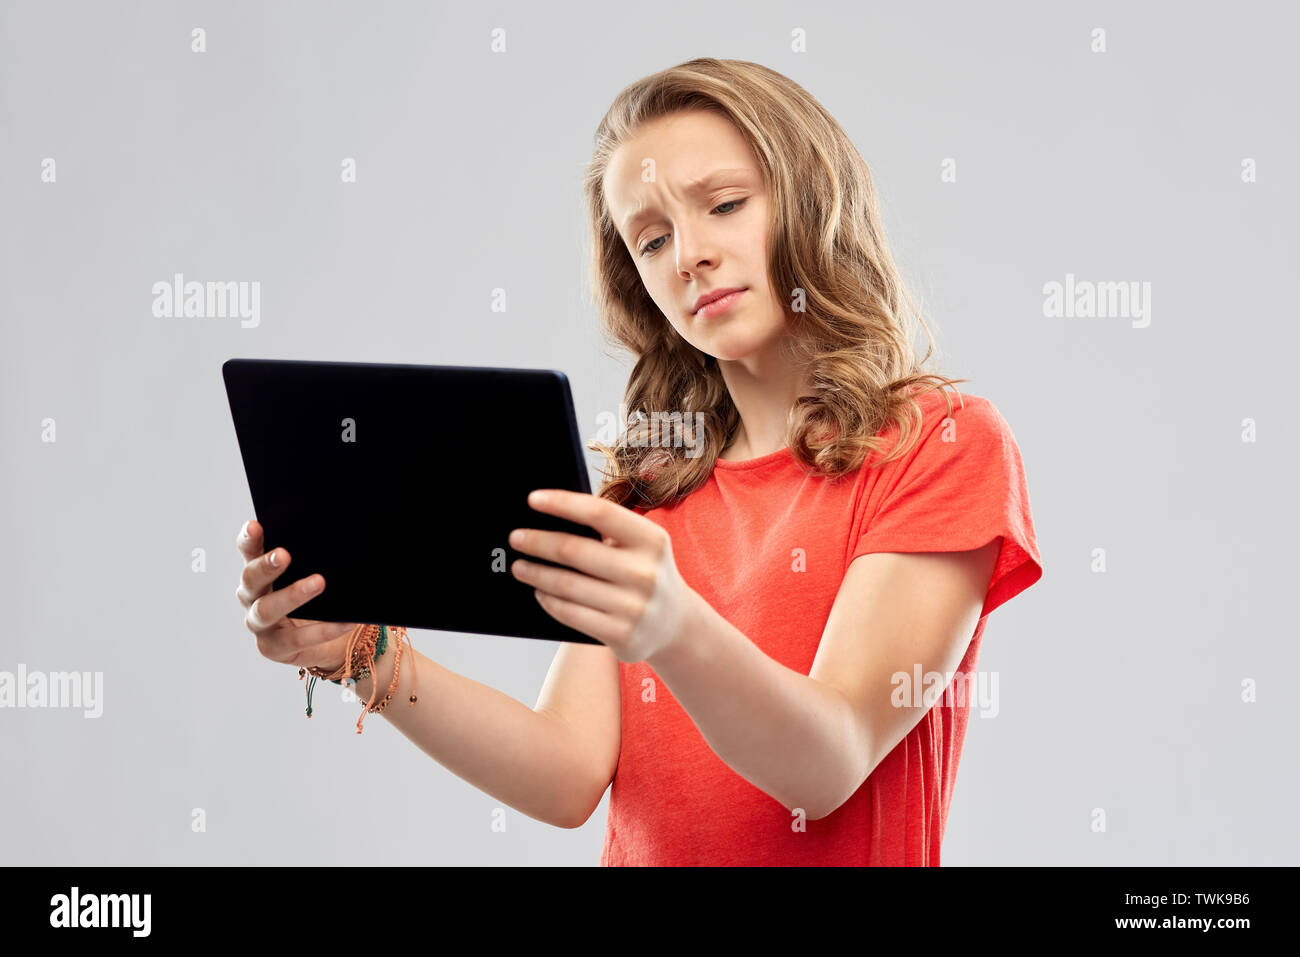 doubting teenage girl with tablet computer Stock Photo